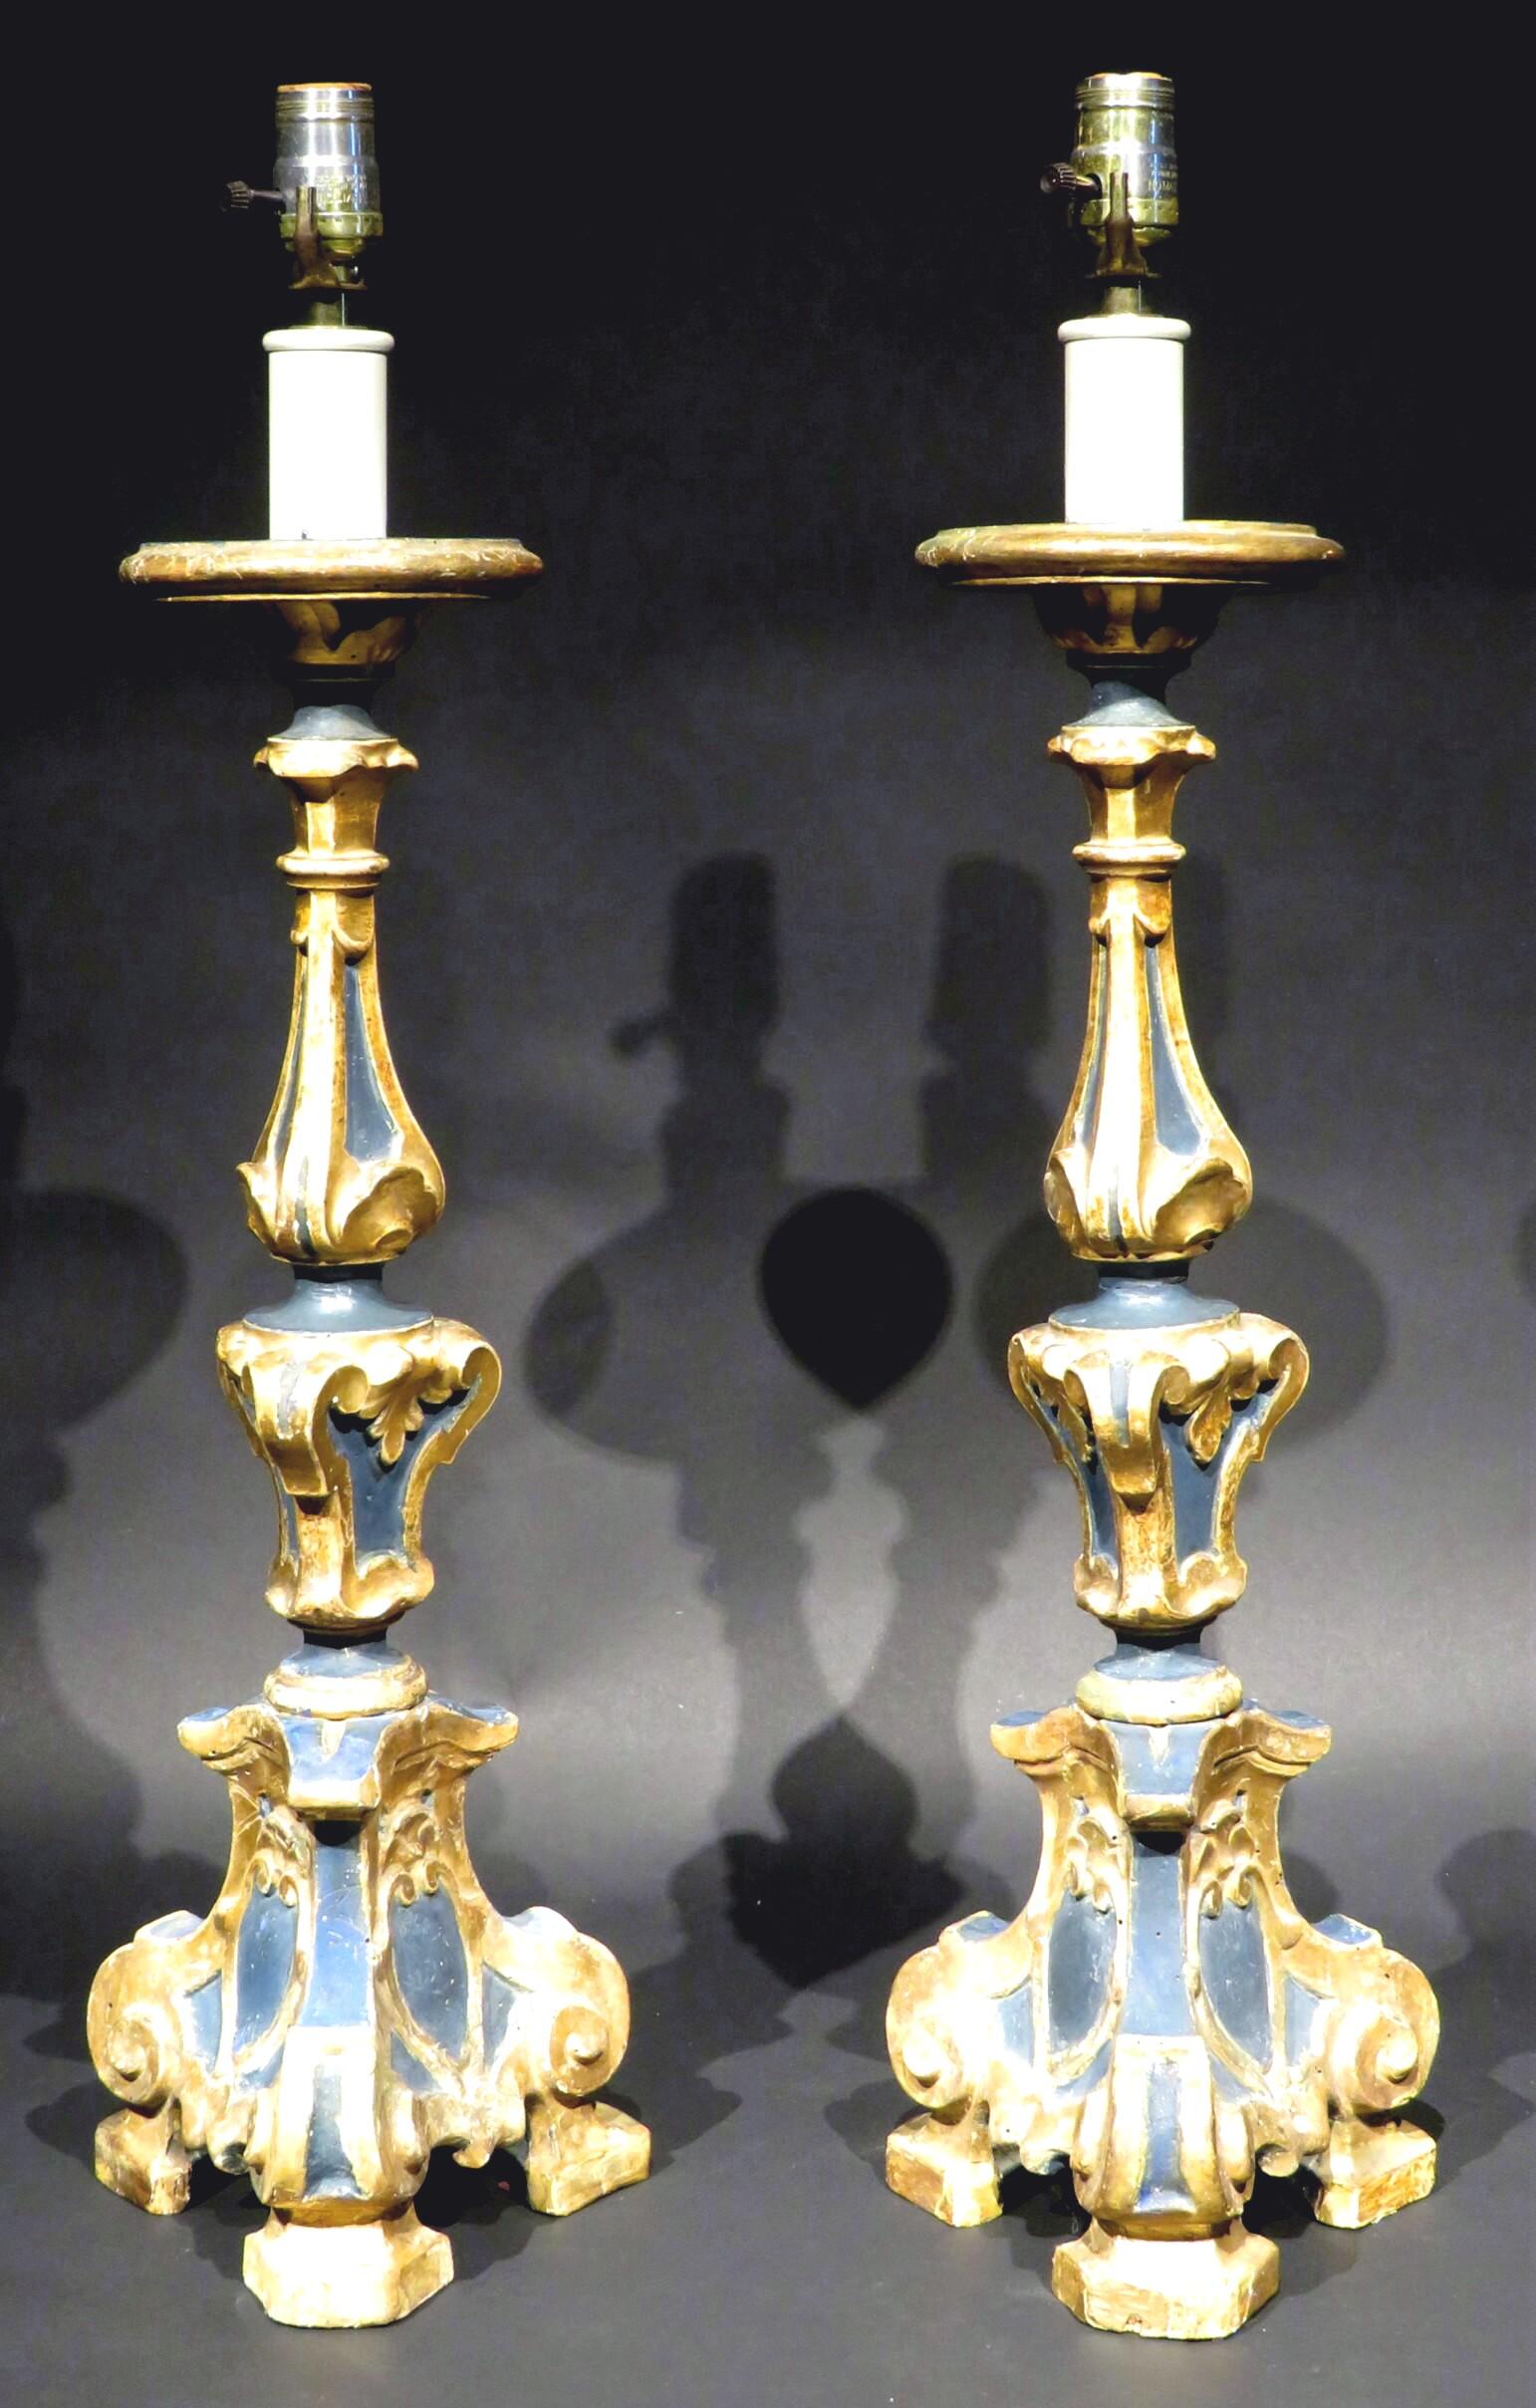 Hand-Carved Pair of 19th Century Baroque Style Pricket Table Lamps, Italian Circa 1890 For Sale